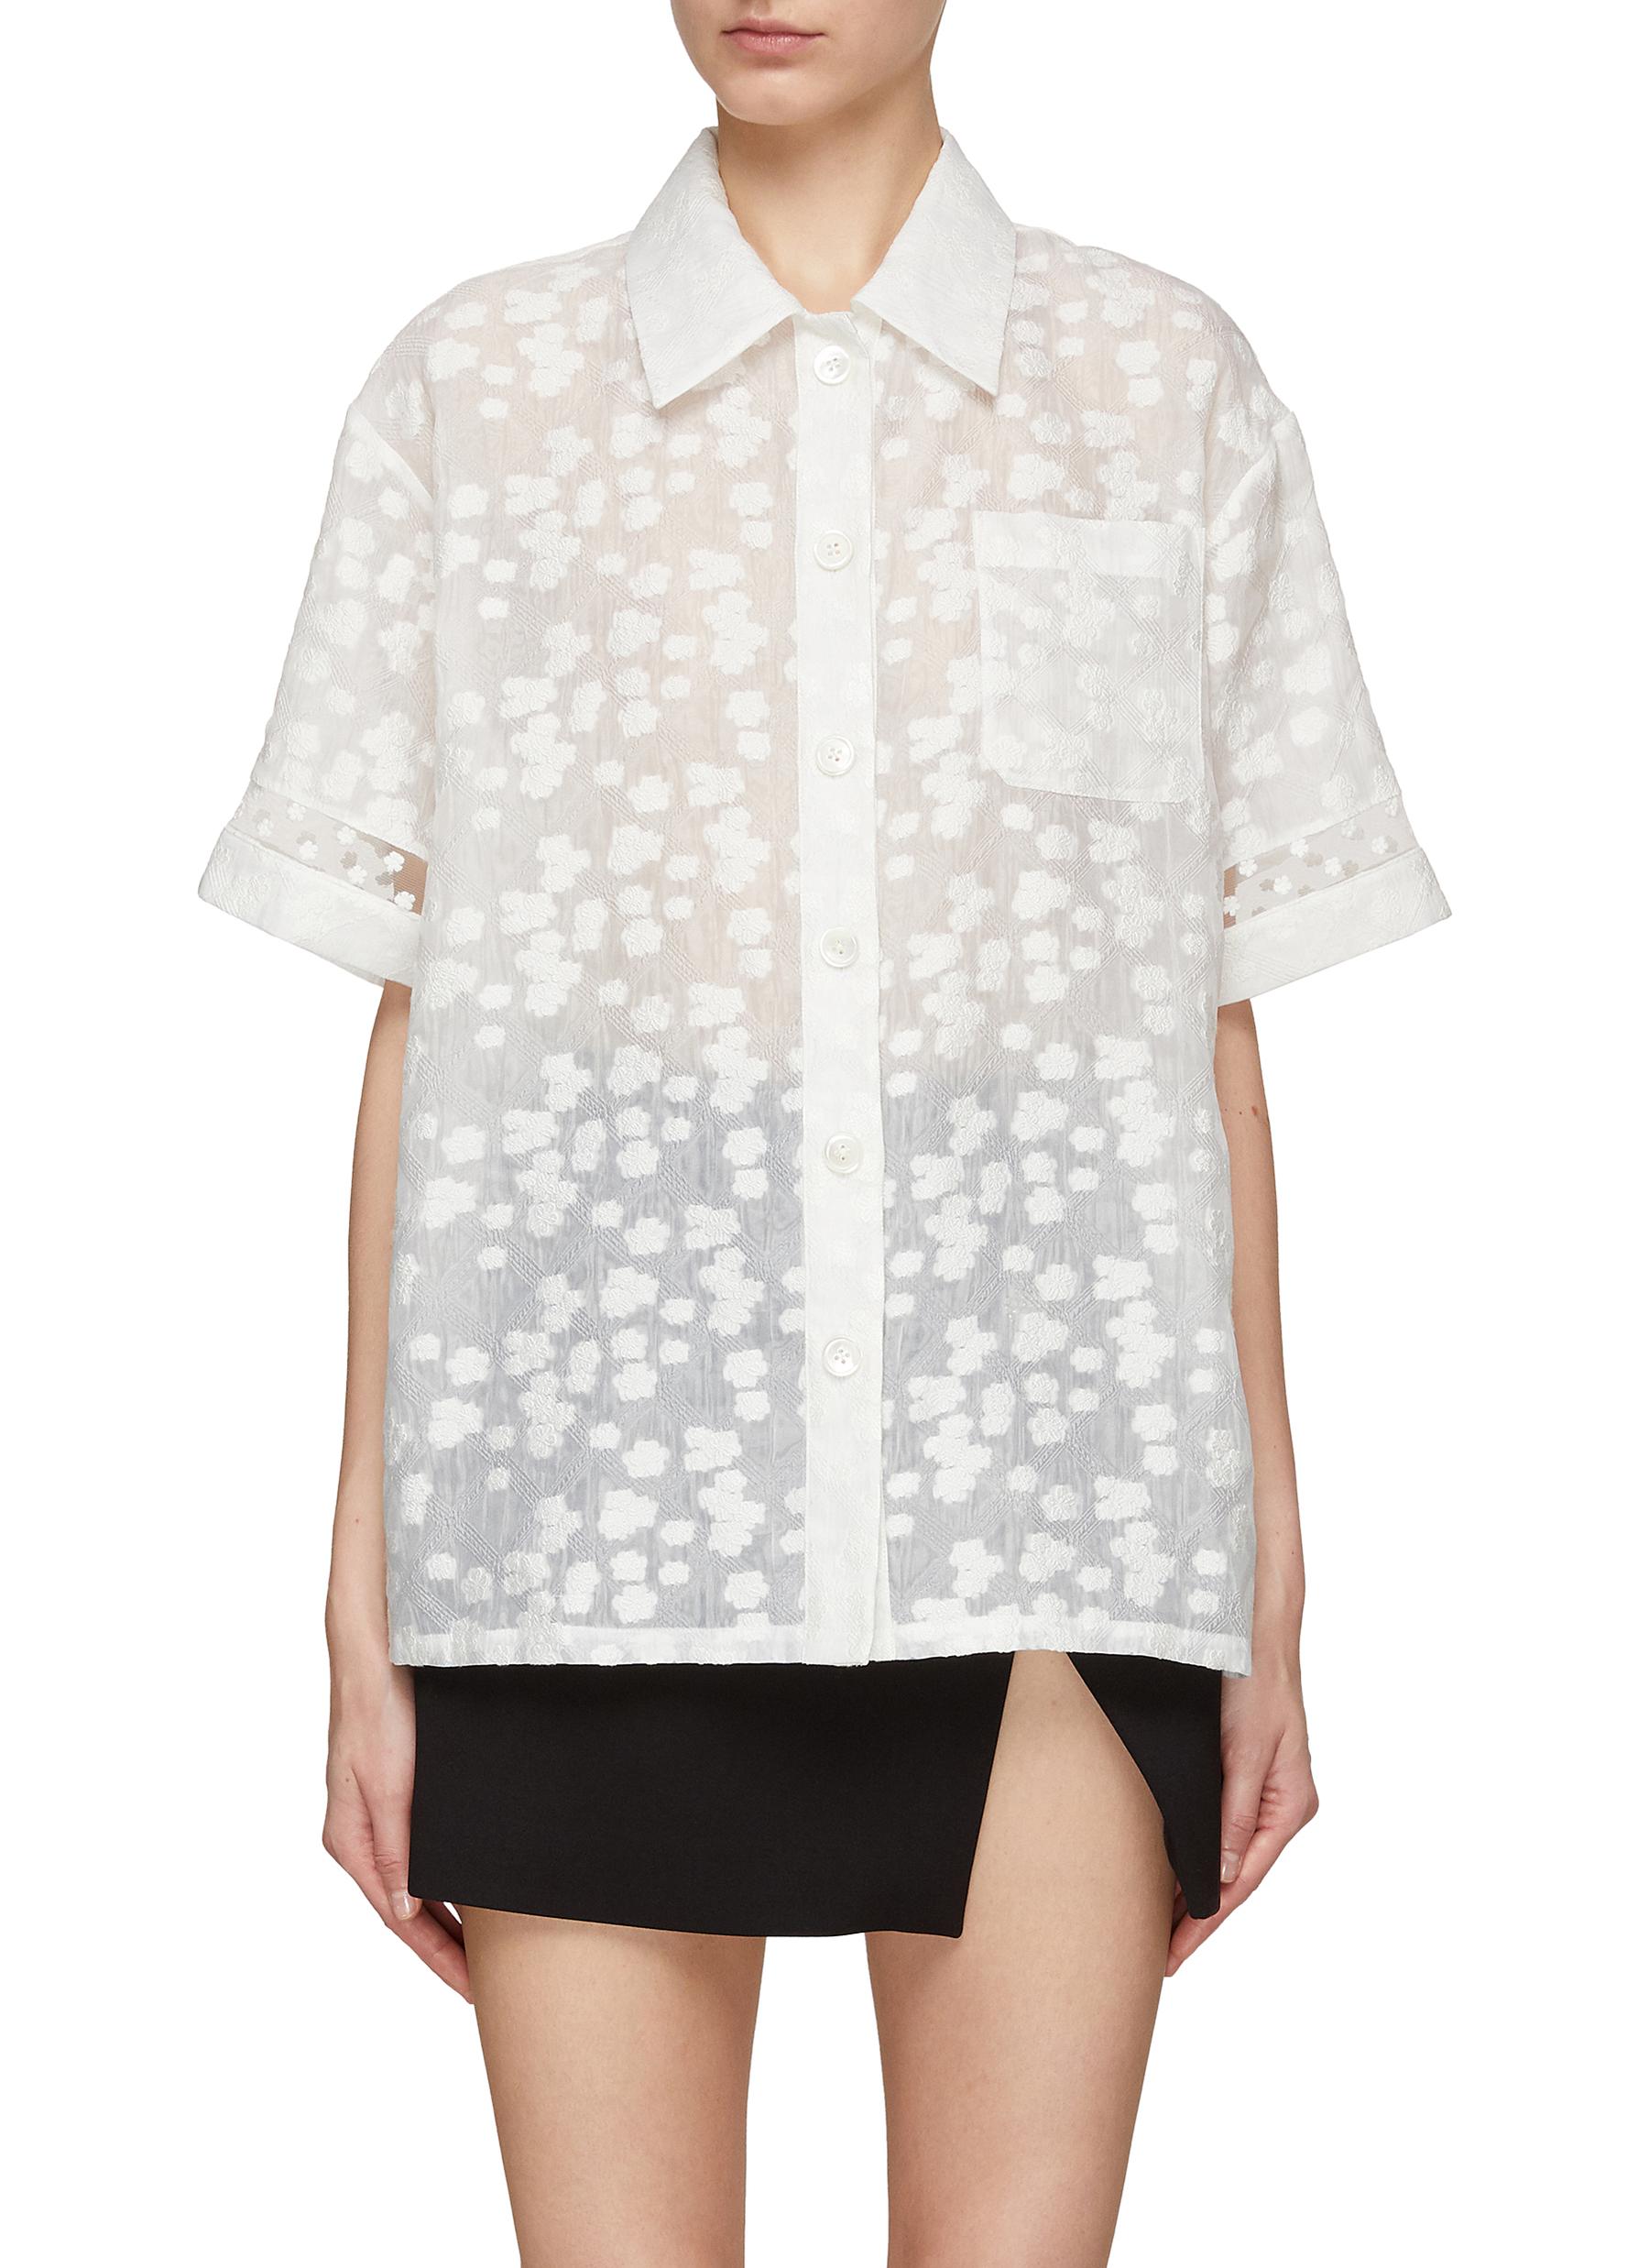 Ming Ma Floral Jacquard Organza Short Sleeve Shirt In White